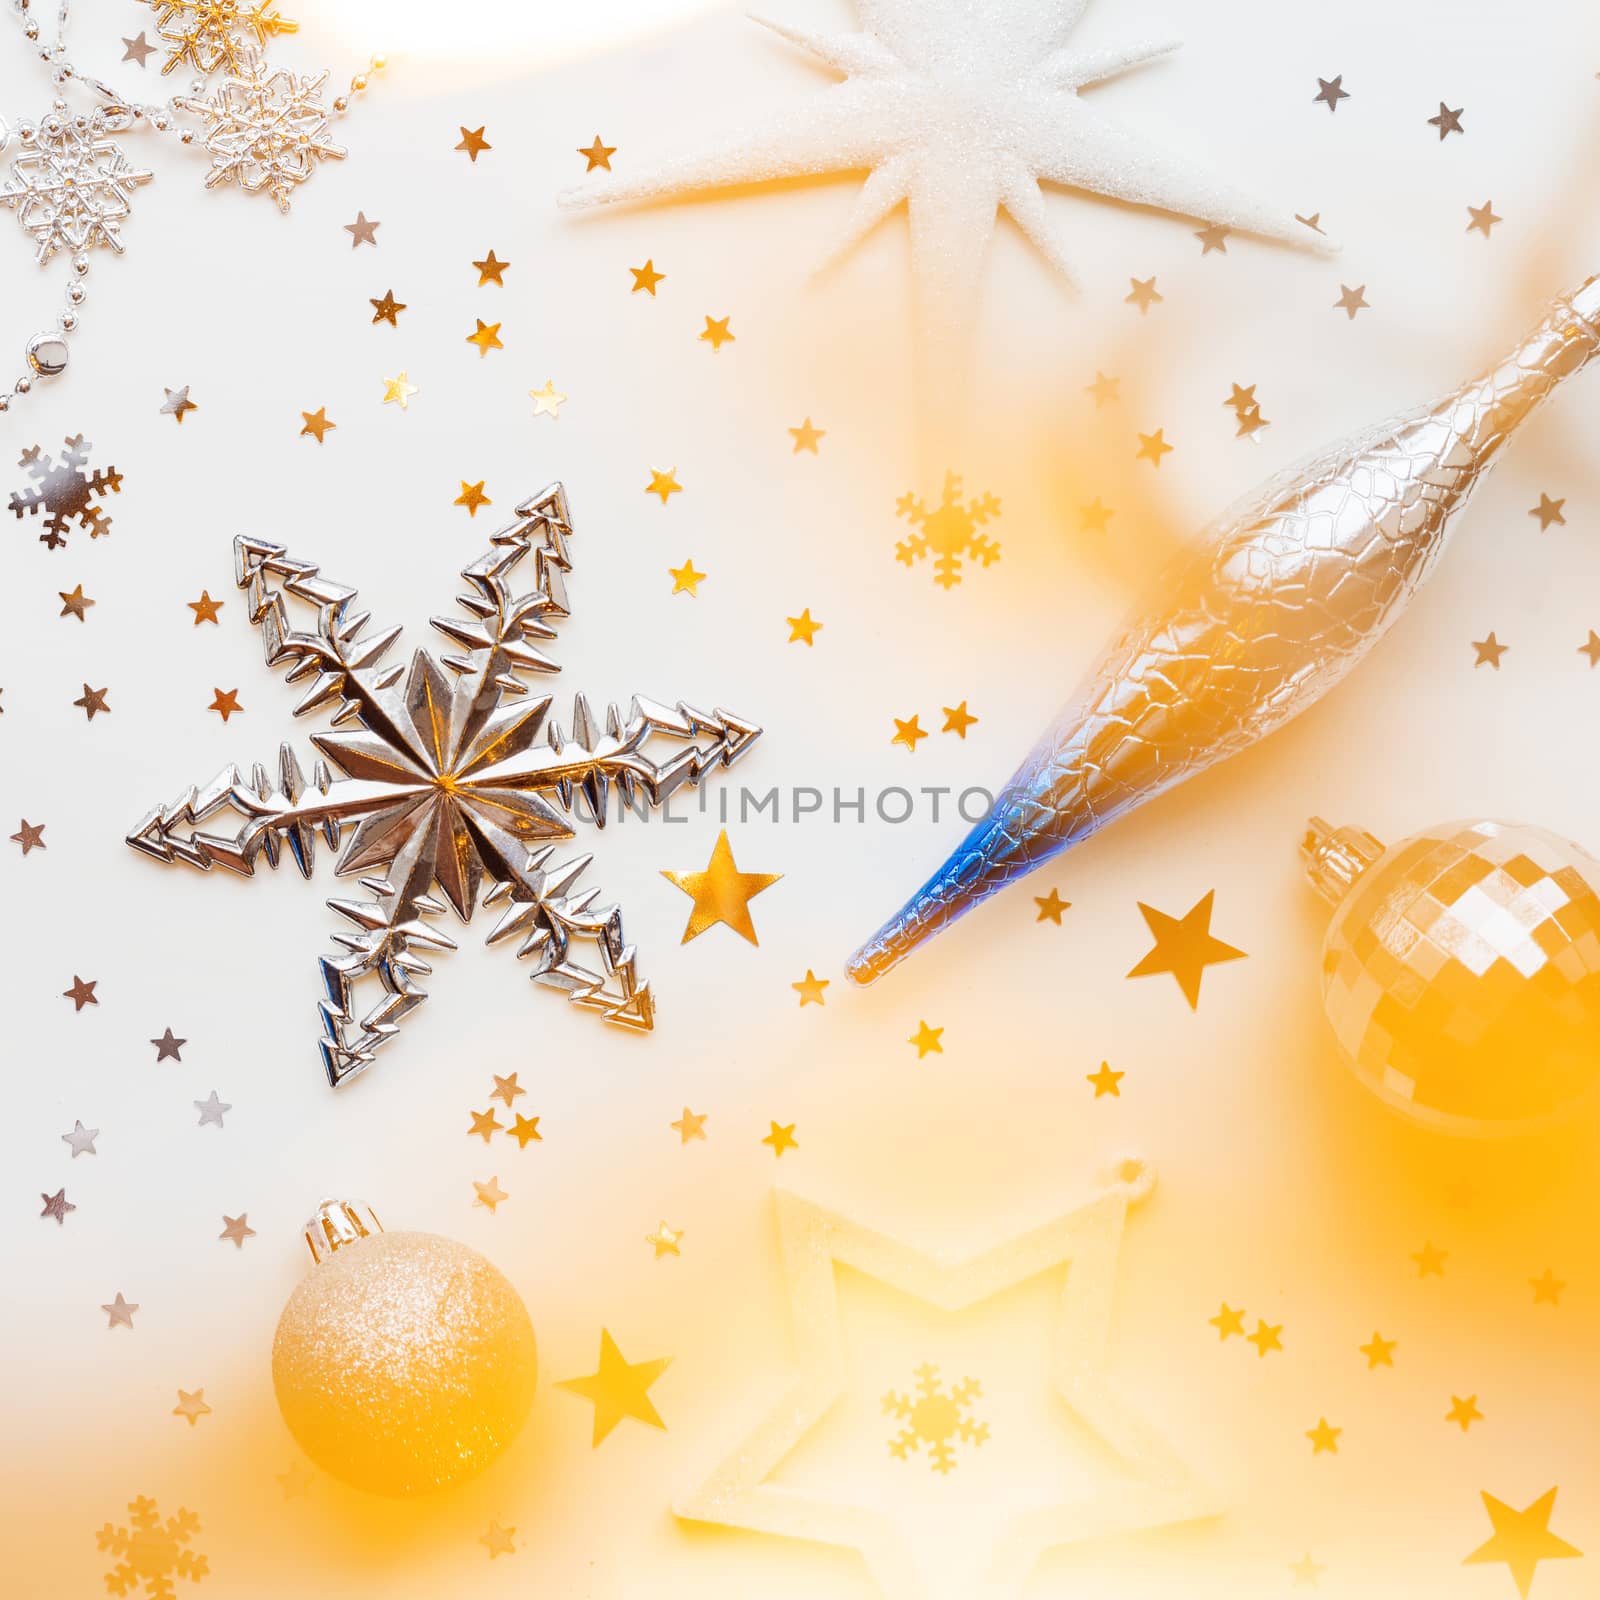 Christmas and New Year holiday background with decorations and l by aksenovko